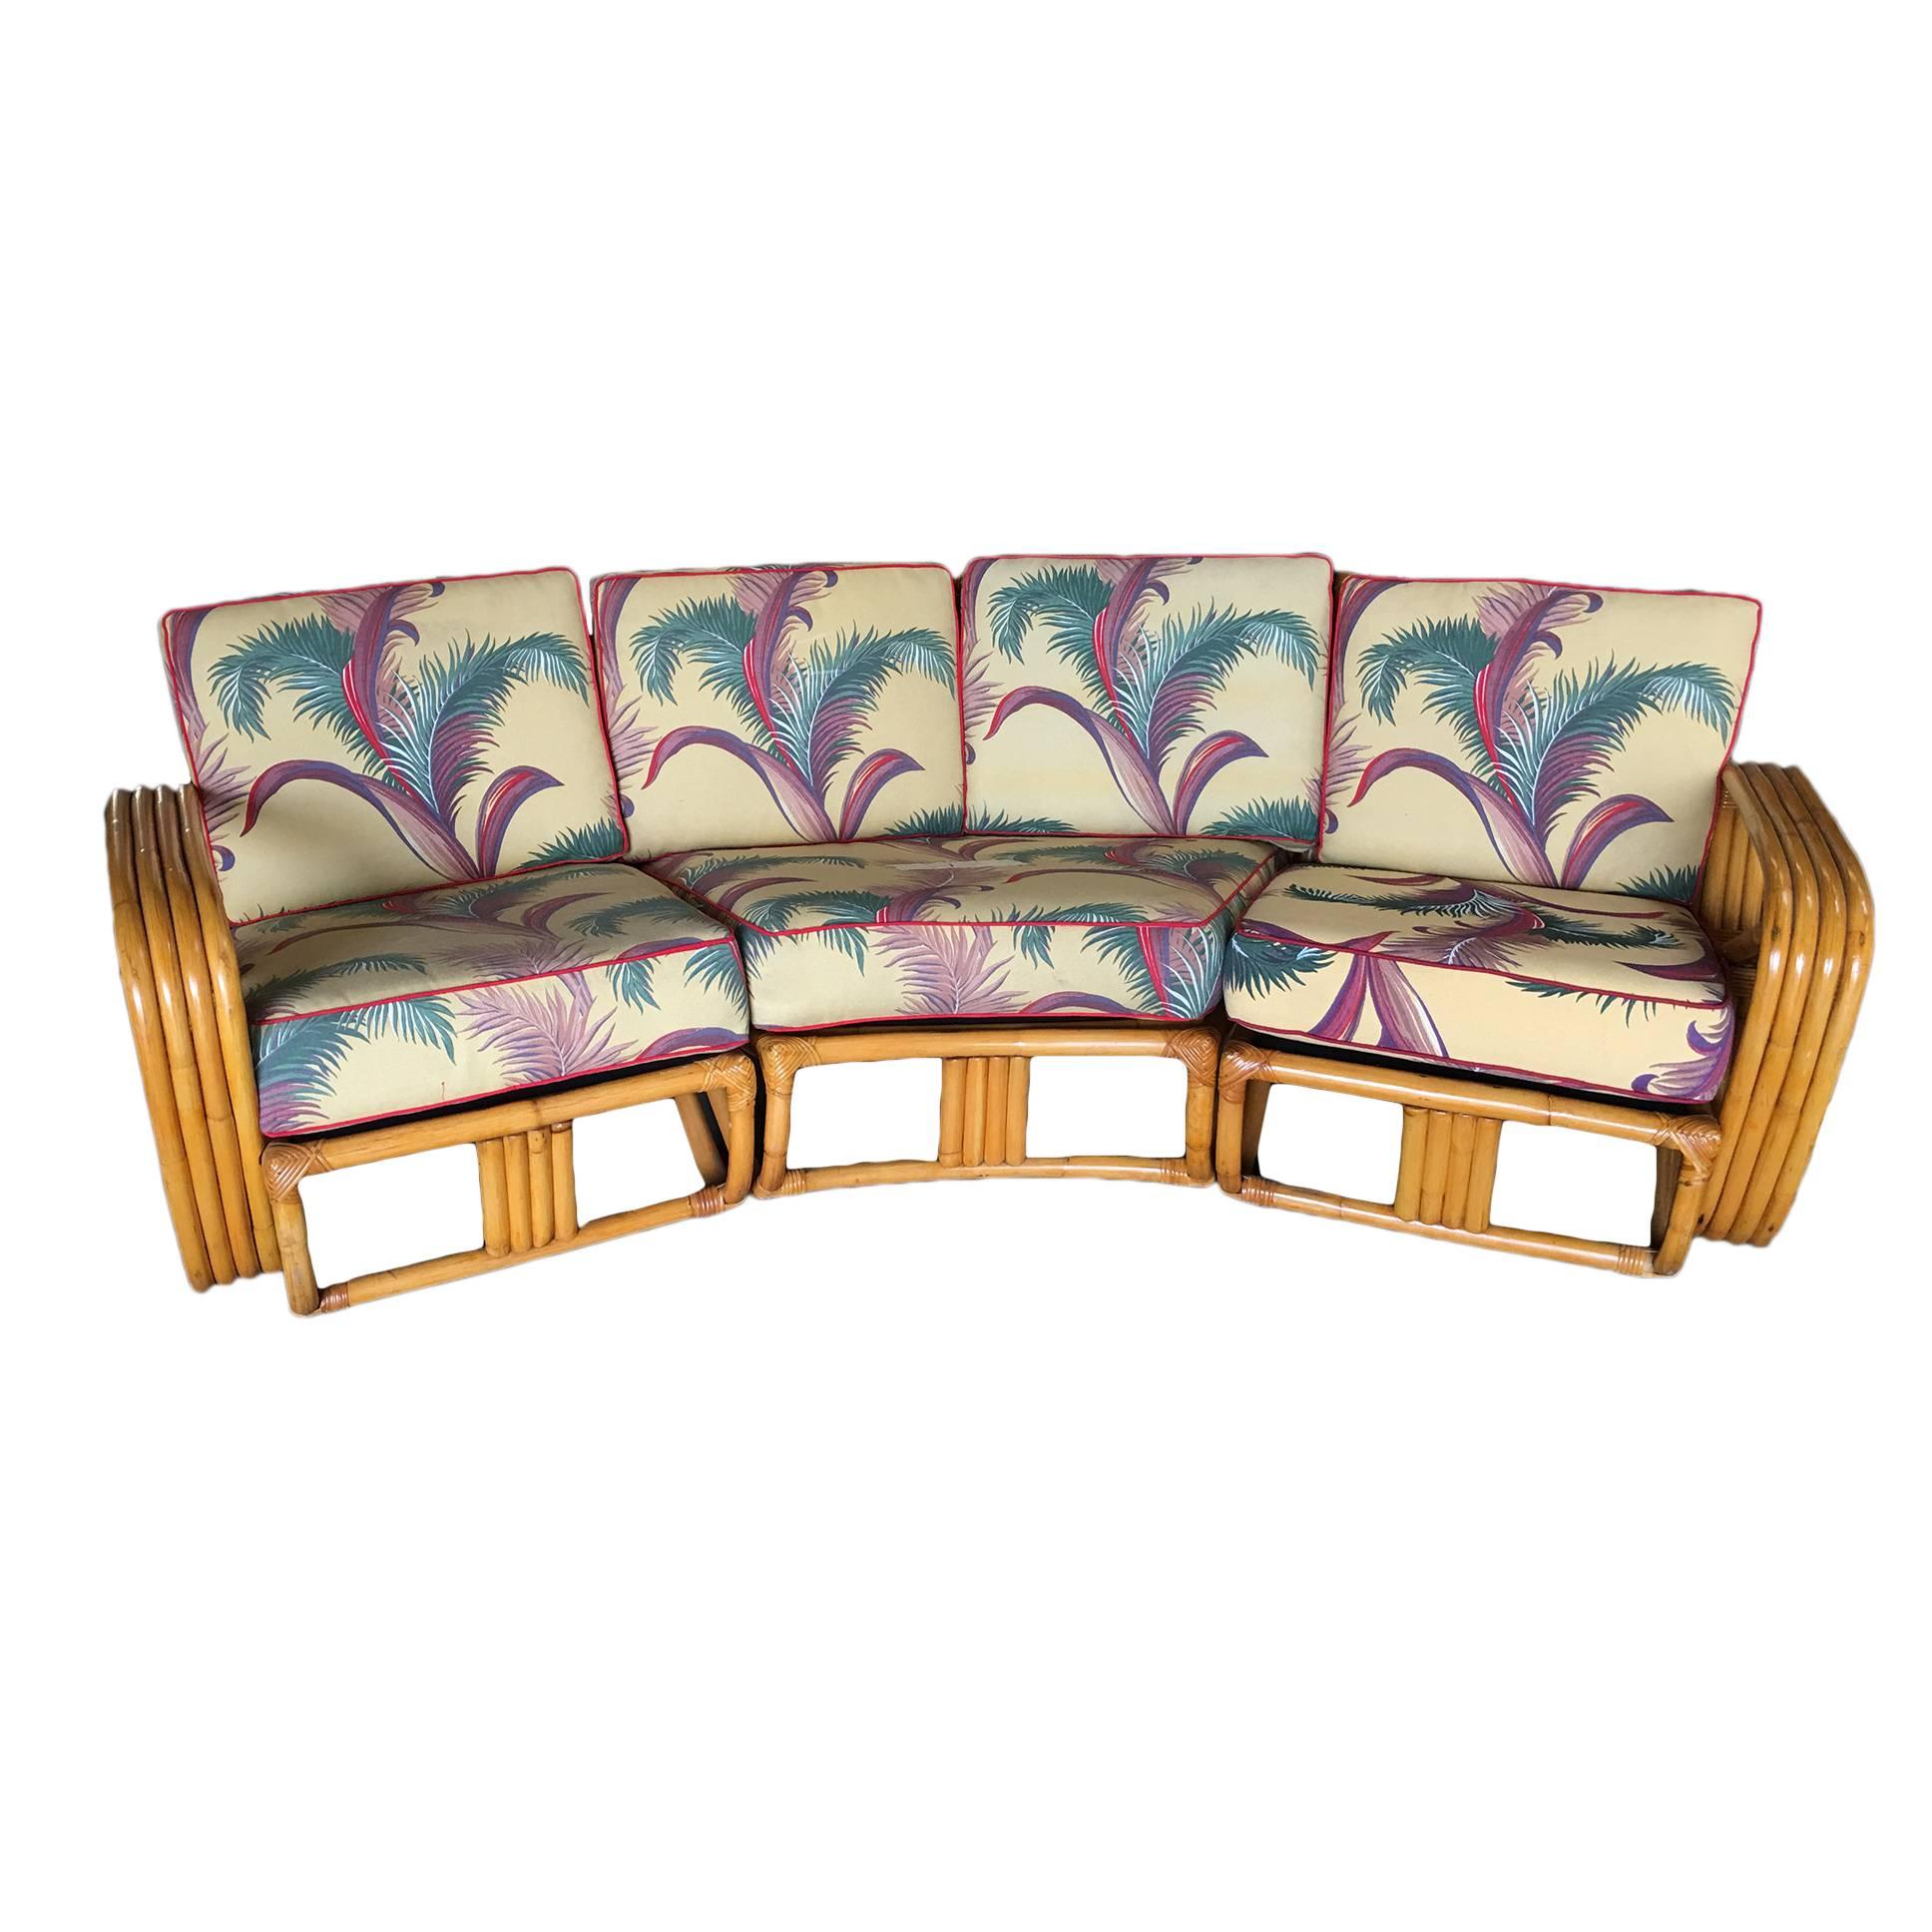 Four strand square pretzel corner rattan sectional sofa designed in the manner of Paul Frankl. This sofa features a bent rattan base with four strand square pretzel arms and is divided into a three sectionals, two end pieces that each fit one person